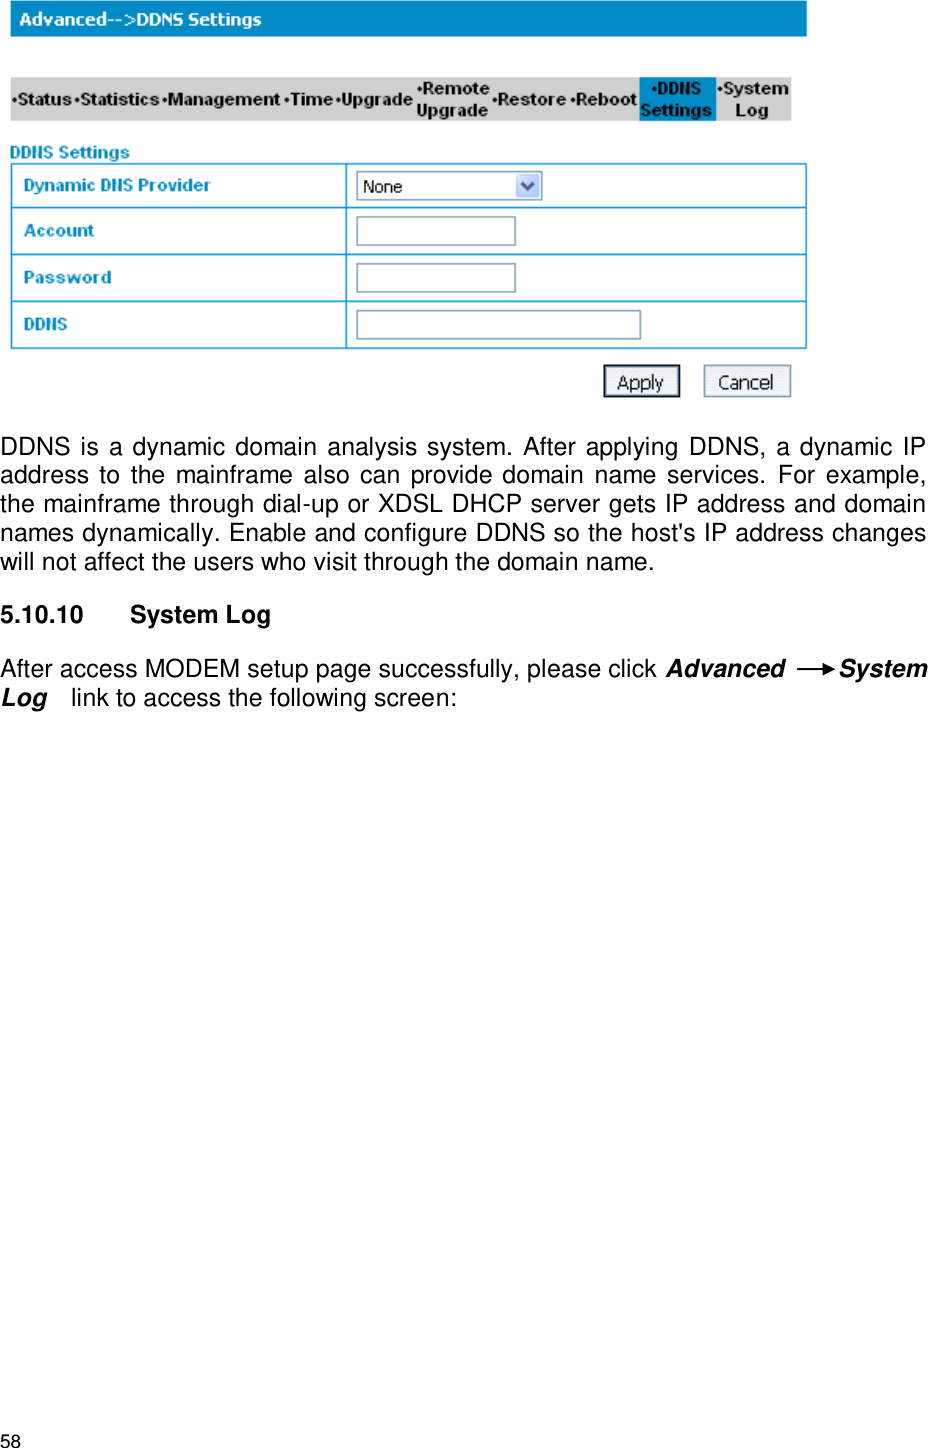 58  DDNS is a dynamic domain analysis system. After applying DDNS, a dynamic IP address to the mainframe also can provide domain  name services.  For example, the mainframe through dial-up or XDSL DHCP server gets IP address and domain names dynamically. Enable and configure DDNS so the host&apos;s IP address changes will not affect the users who visit through the domain name. 5.10.10  System Log After access MODEM setup page successfully, please click Advanced  System Log   link to access the following screen:   